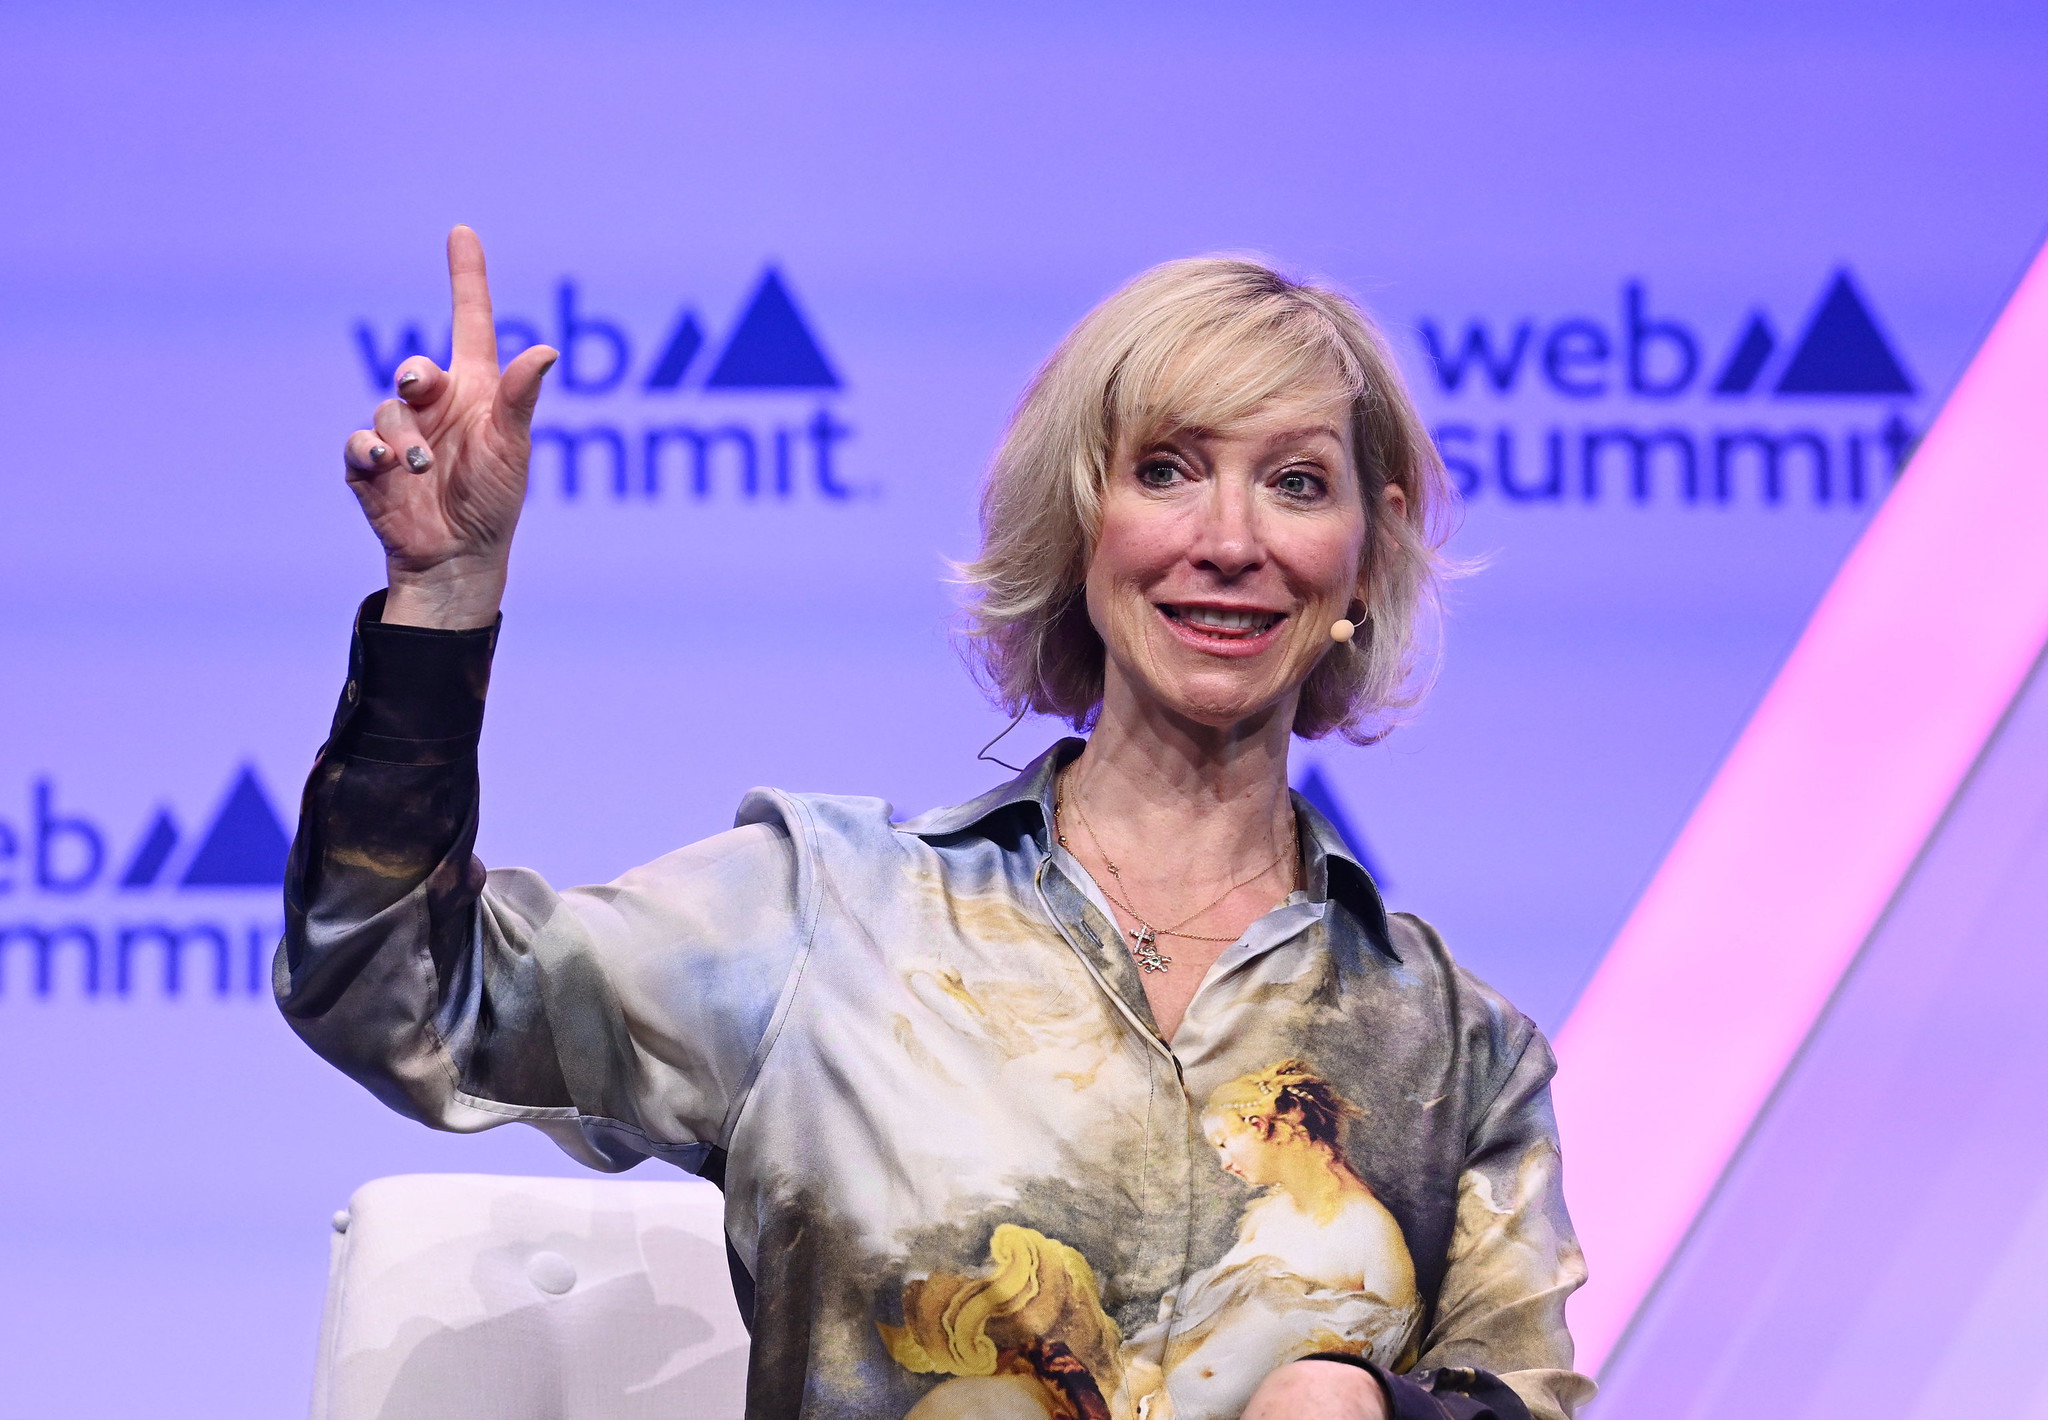 A photograph of a person (Janet Adams, COO of SingularityNET) on stage at Web Summit. The person has one finger pointed in the air. They appear to be speaking.